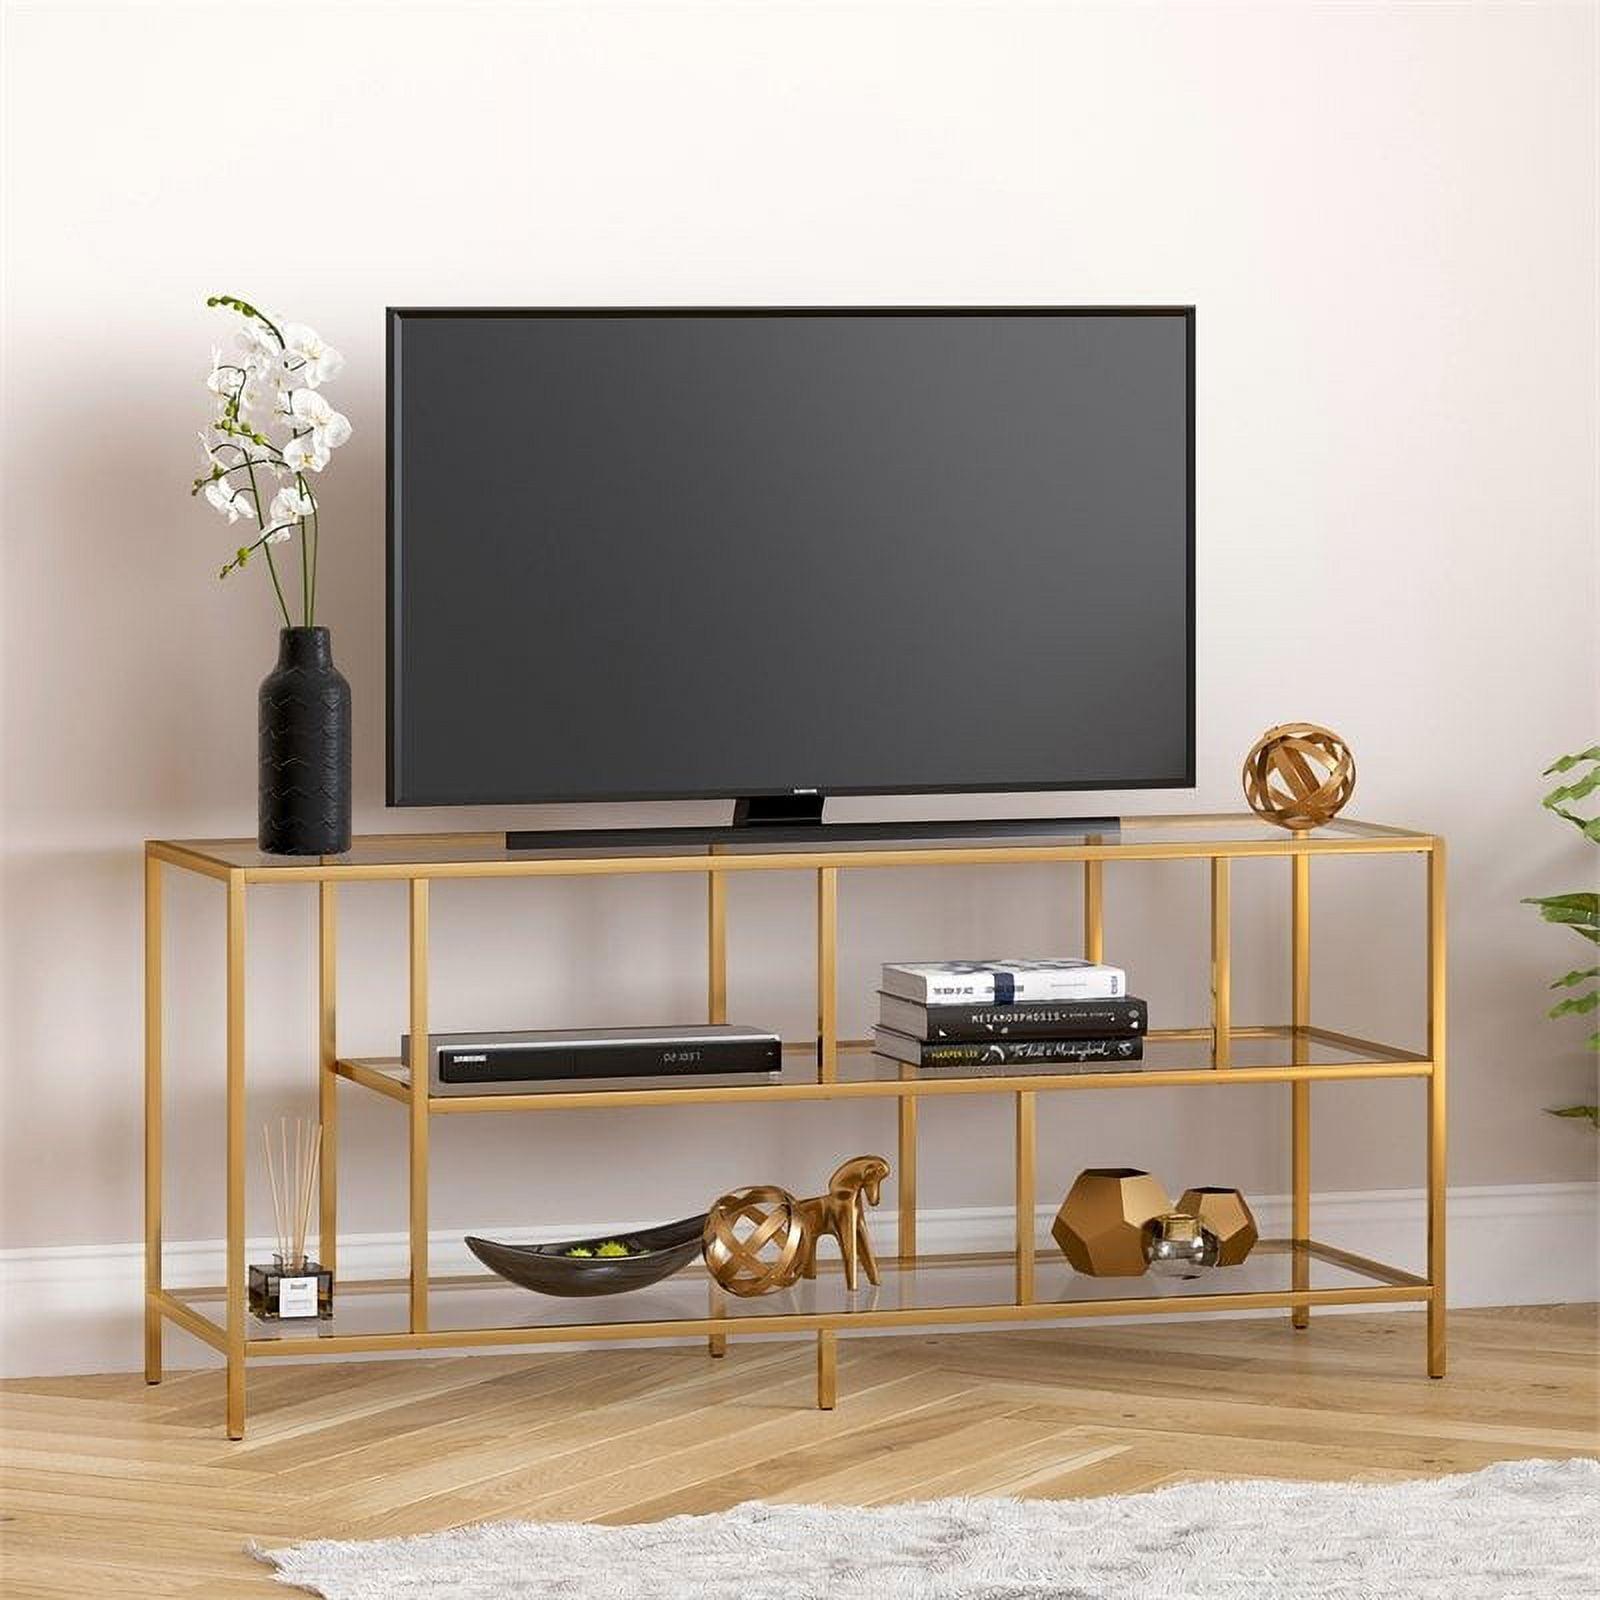 Winthrop 55" White Brass TV Stand with Tempered Glass Shelves